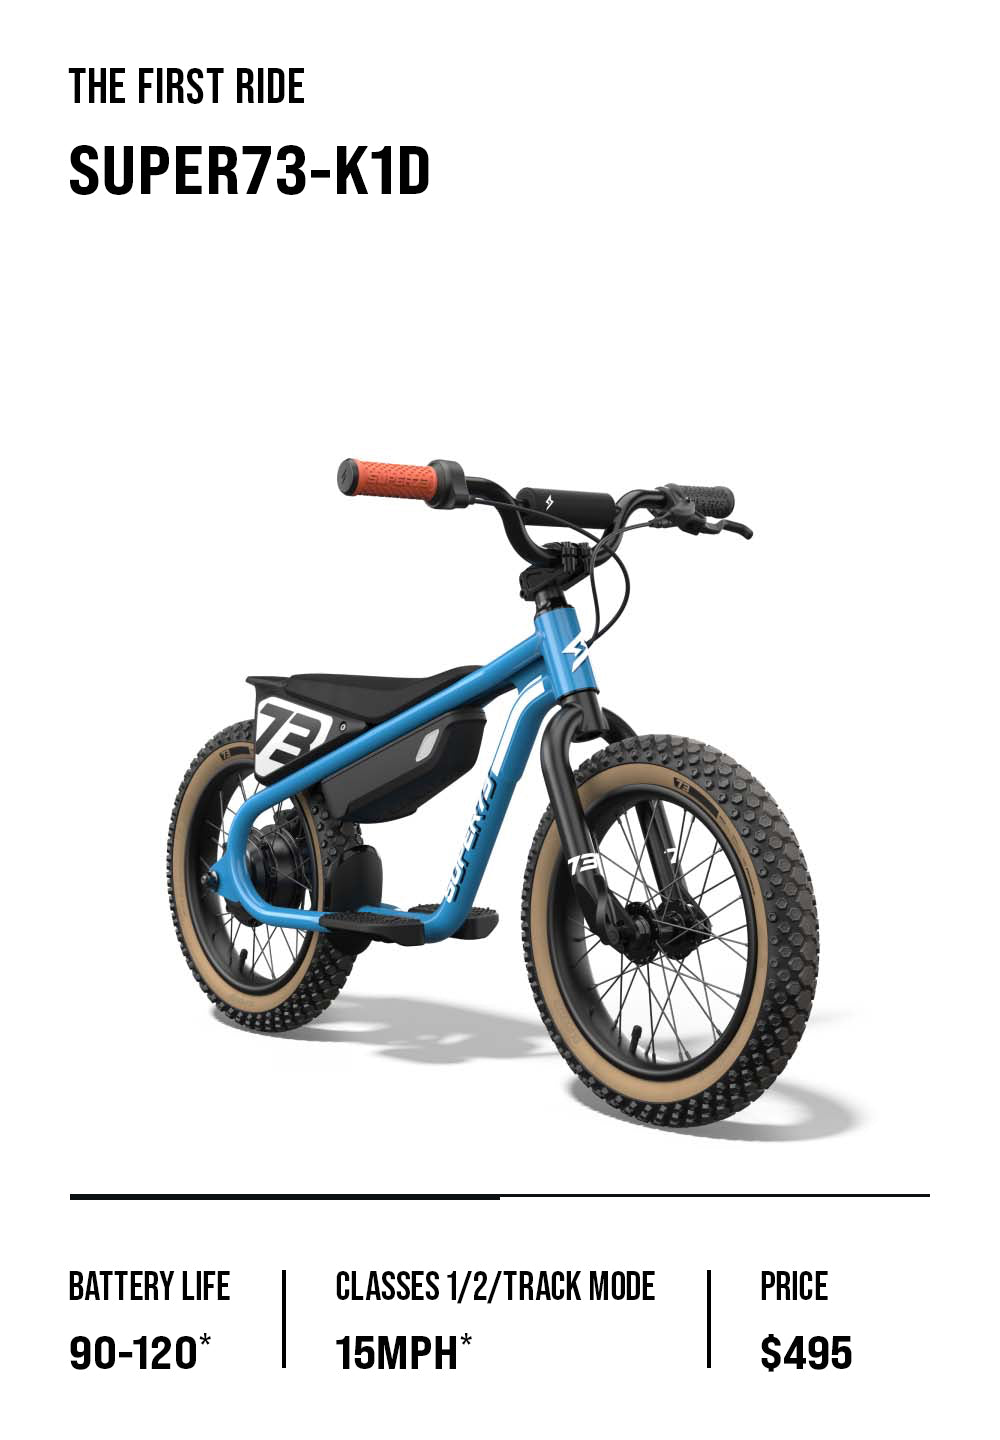 K1D product image and bike specs with $495 pricing